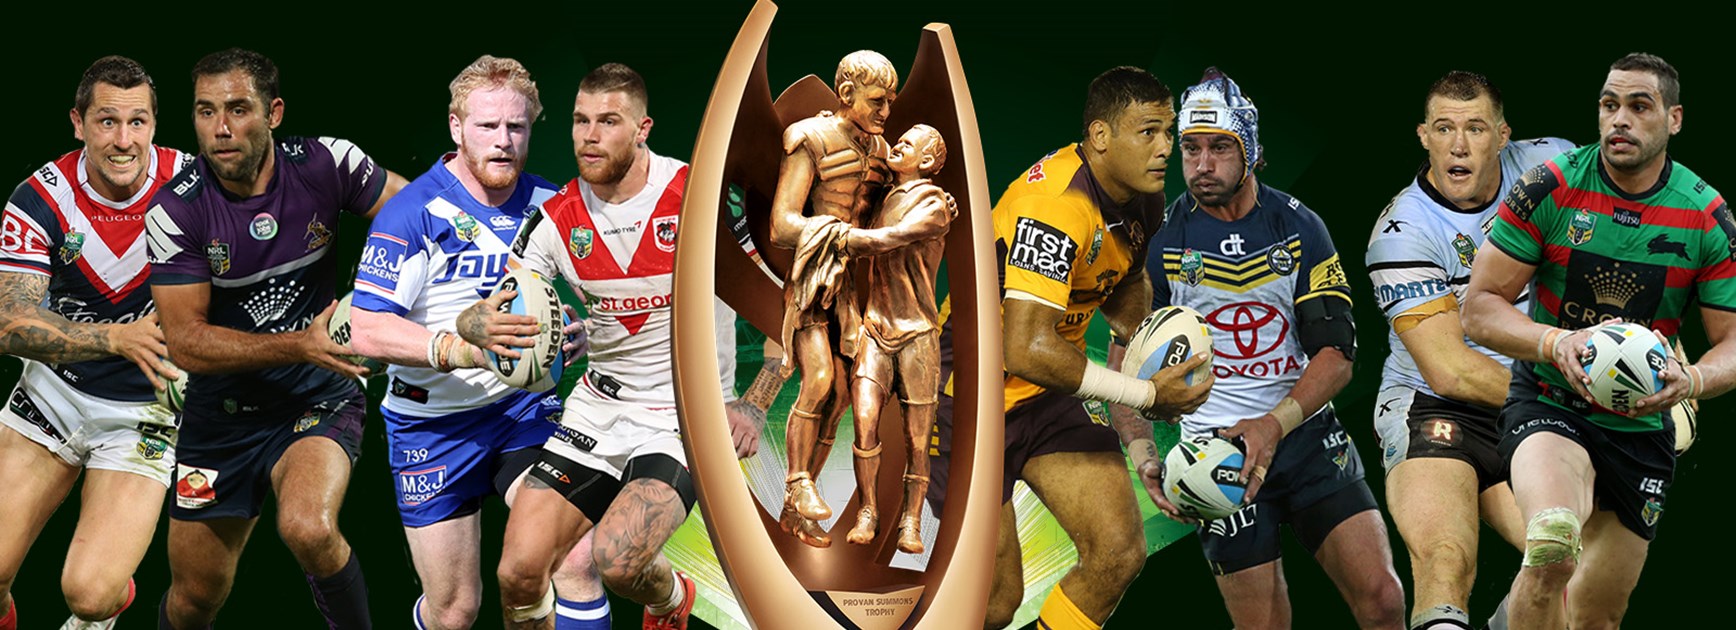 Welcome to the NRL Telstra Premiership Finals Series.